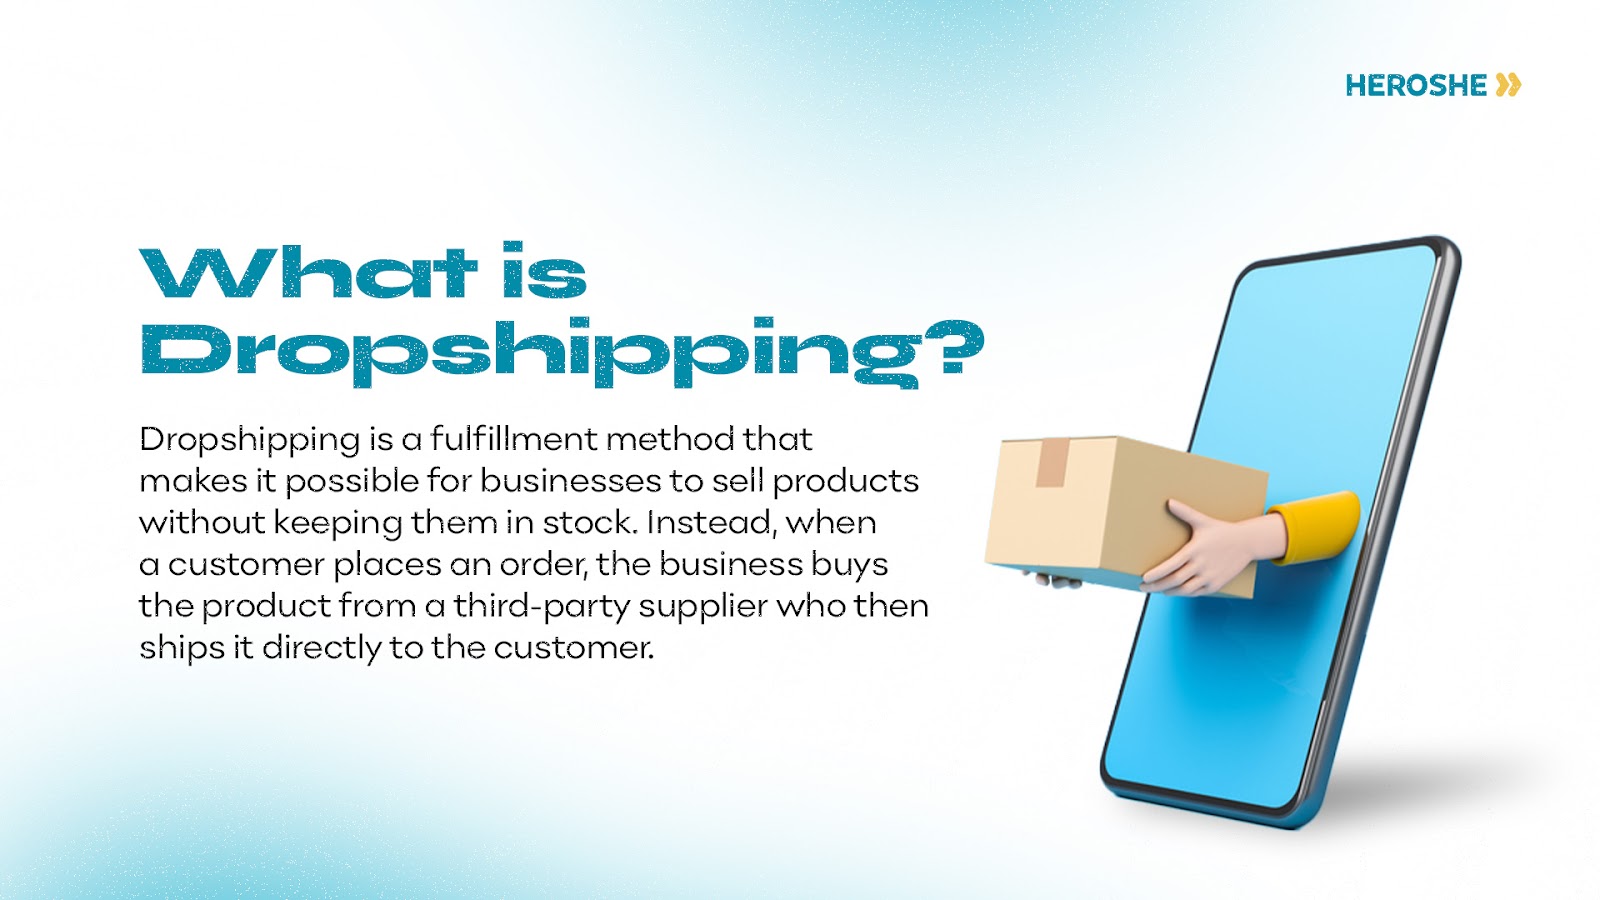 A graphics poster showing what is dropshipping? and giving the definition to it.